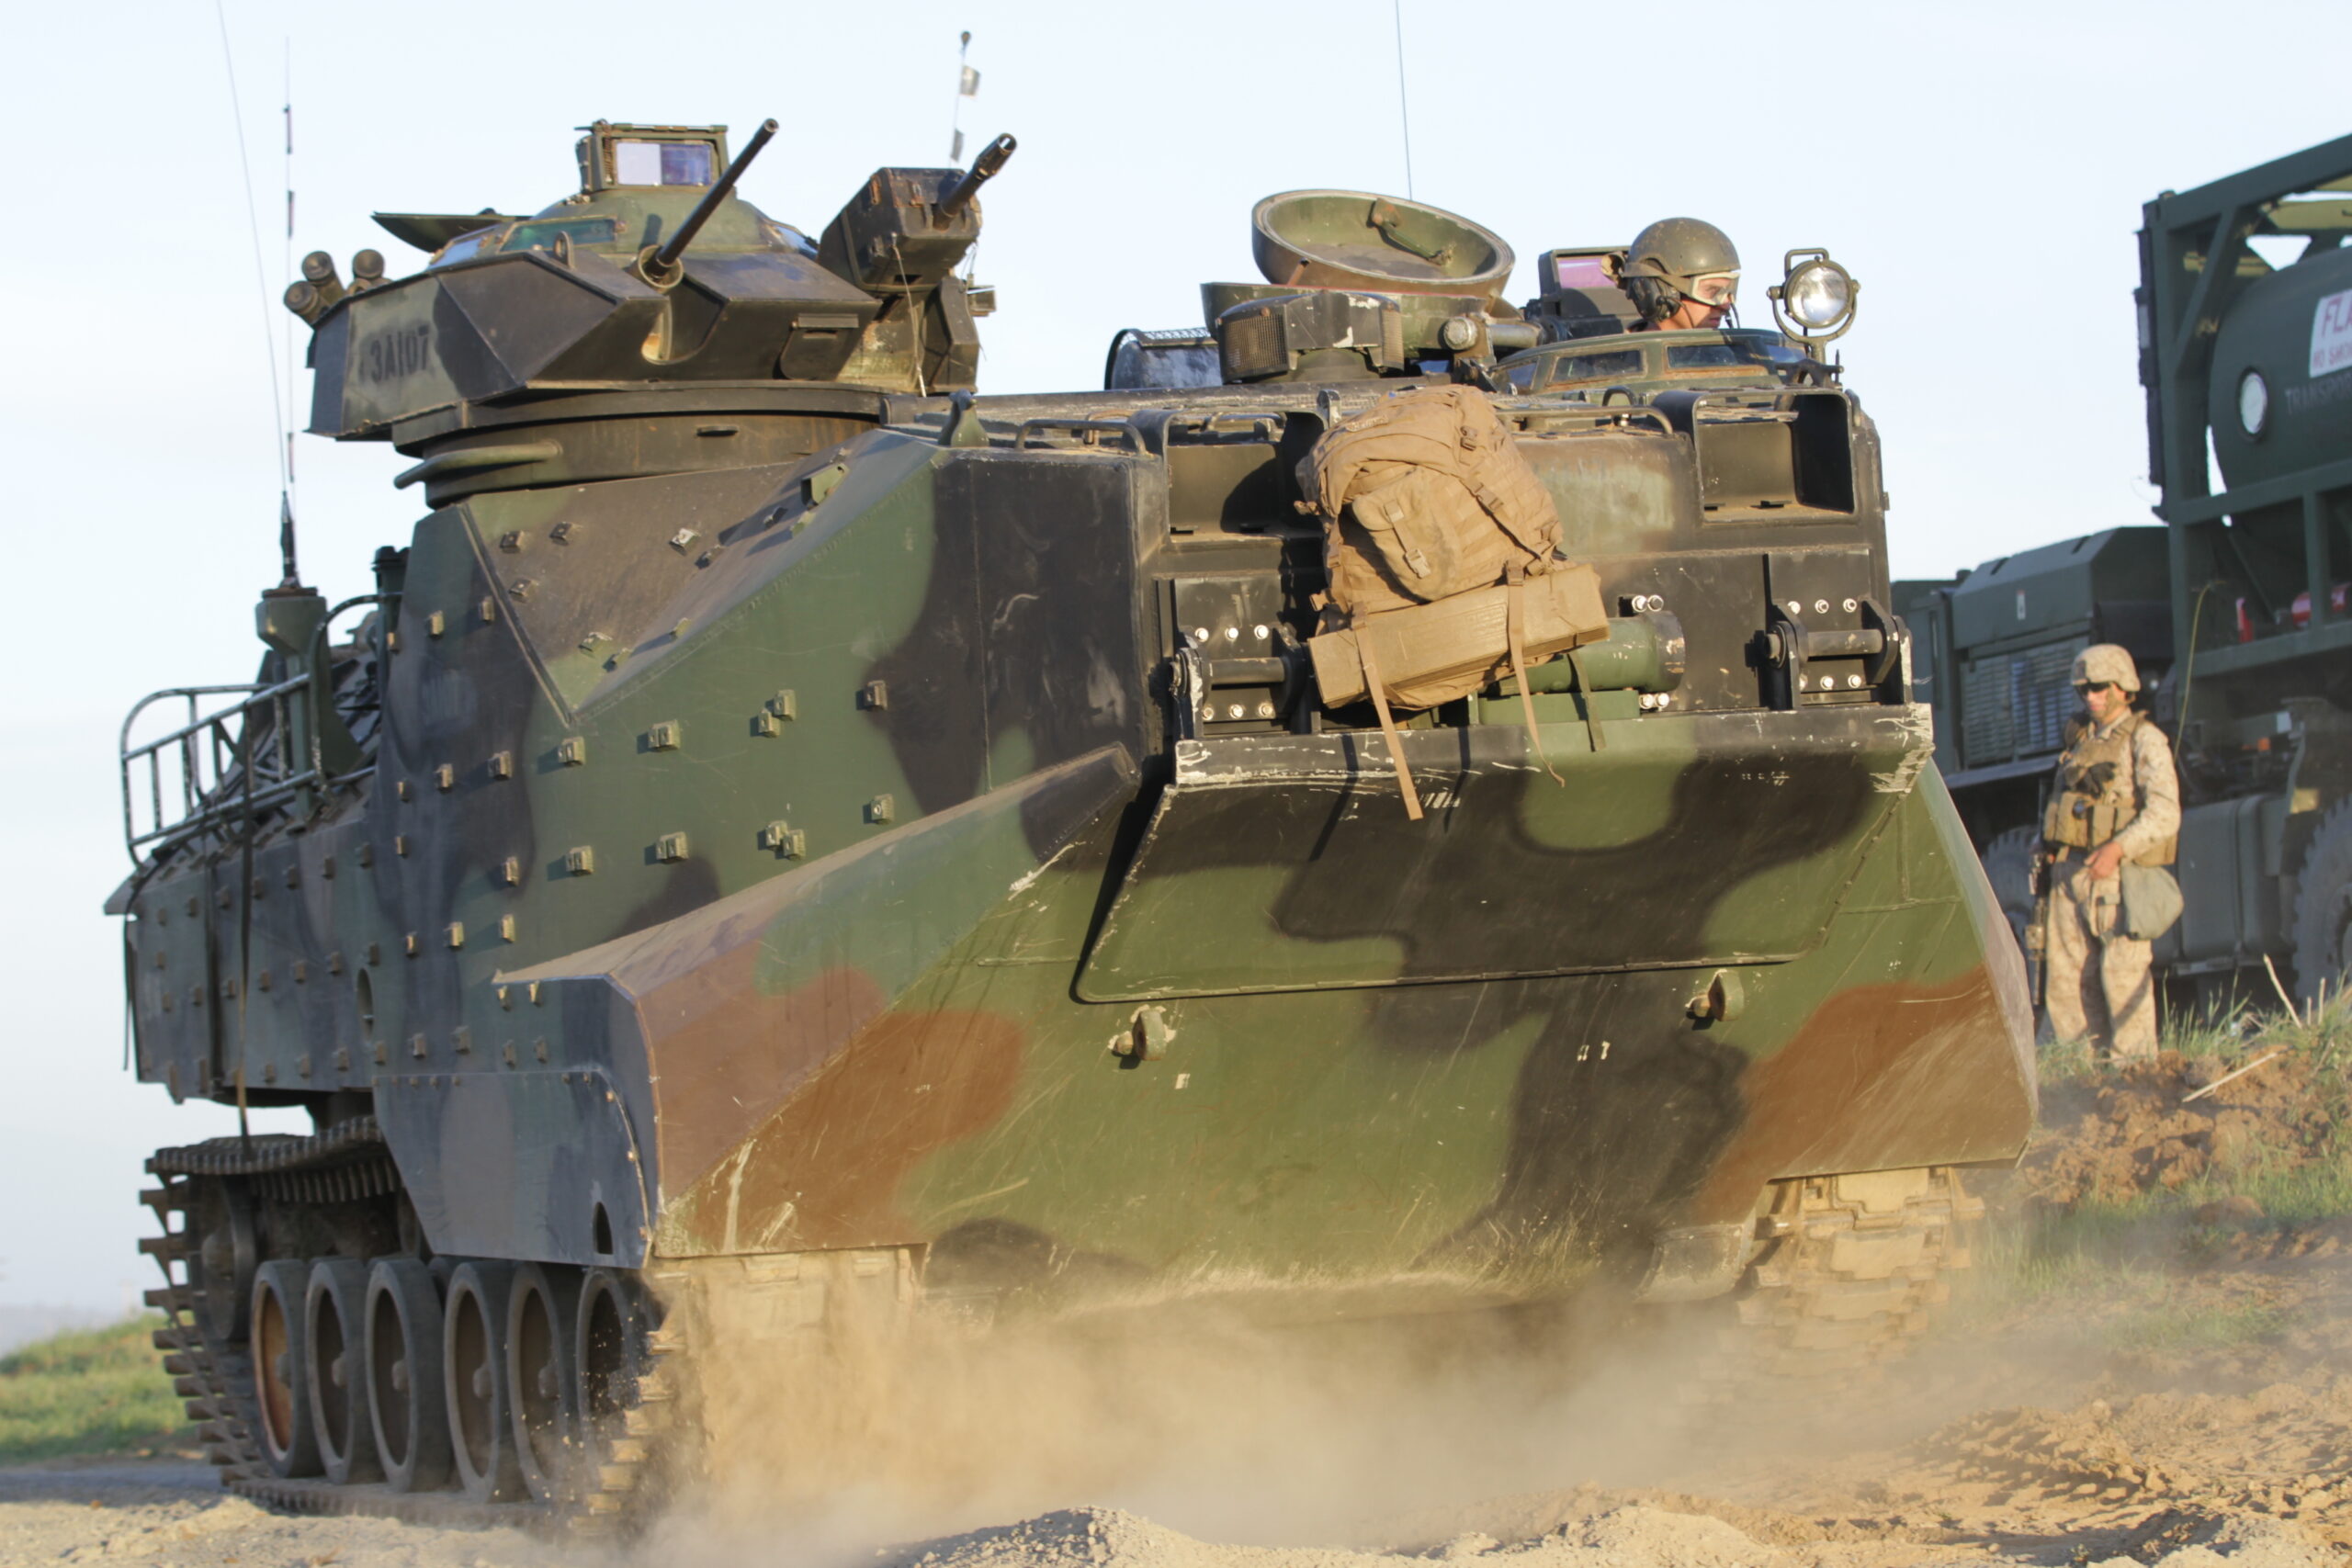 An AAV during a Marine Corps Combat Readiness Evaluation at Marine Corps Base Camp Pendleton, California, in March 2014. <em>U.S. Marine Corps photo by Lance Cpl. David Silvano/released</em>